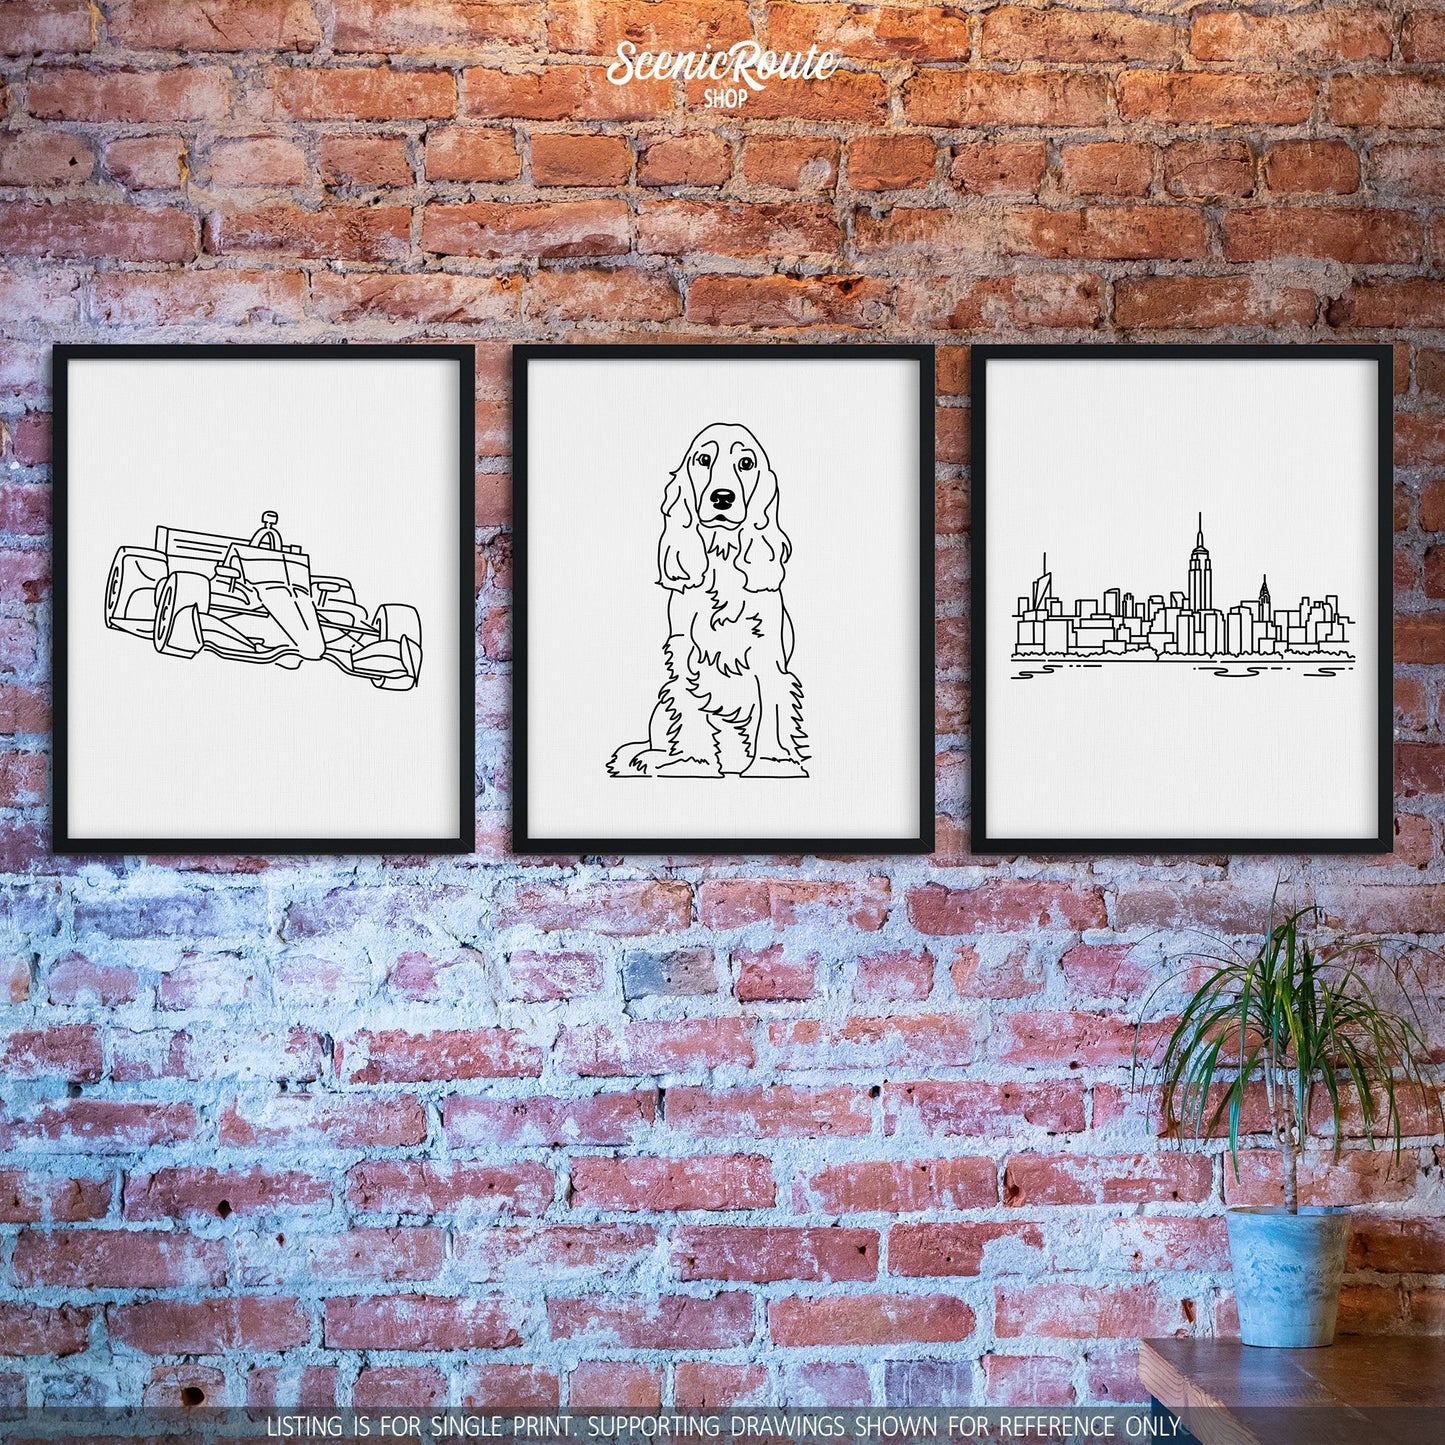 A group of three framed drawings on a brick wall.  The line art drawings include an Indy Car, a Cocker Spaniel dog, and the New York City Skyline